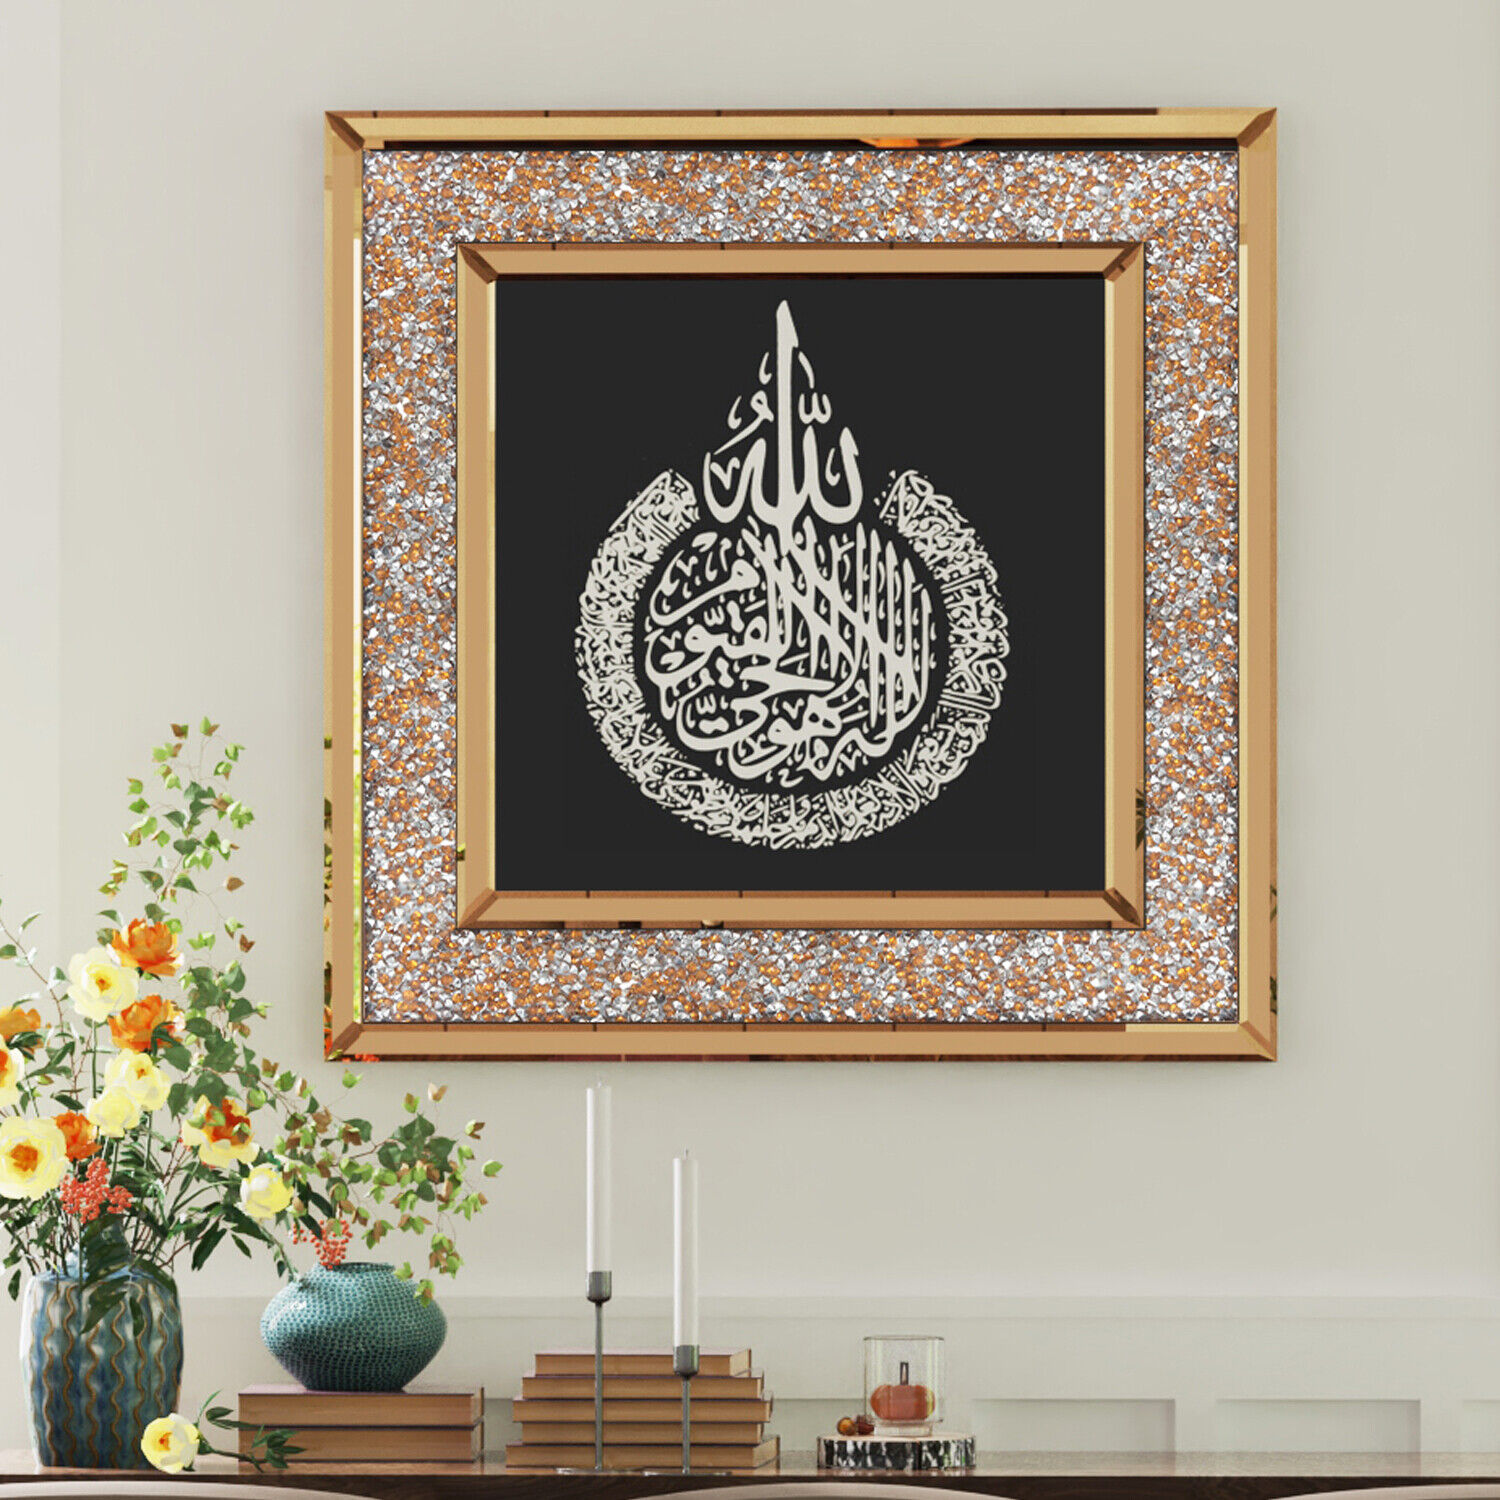 Wisfor Diamond Wall Mirror with Islamic Blessings Brown Art Mirror for Gifts